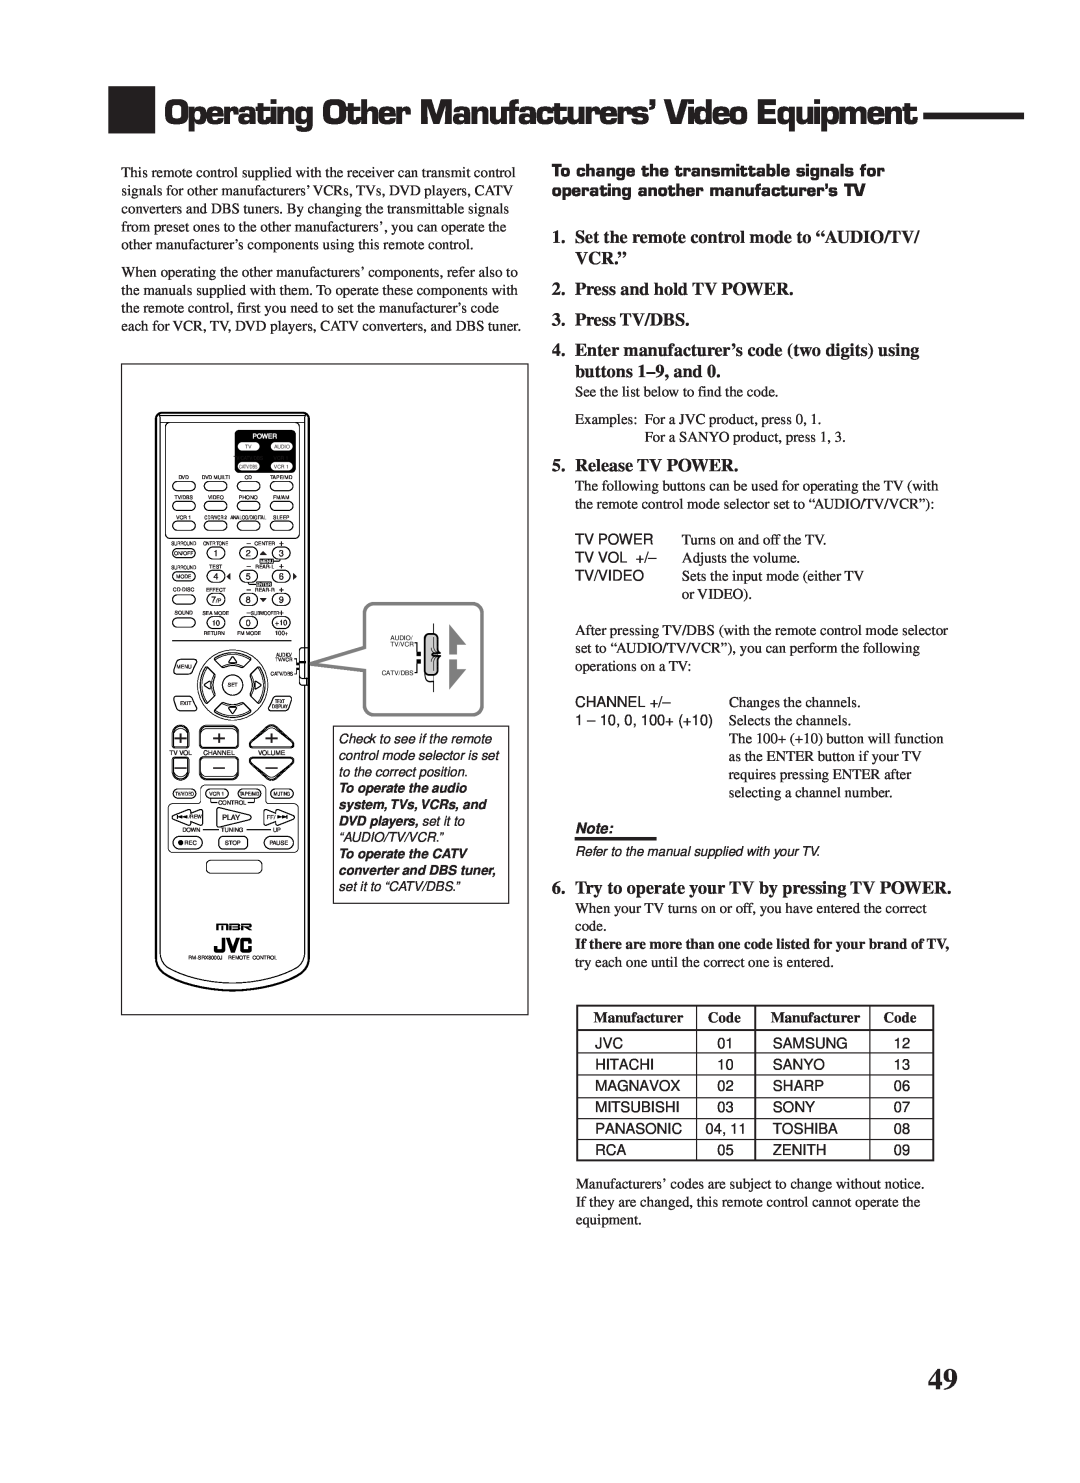 JVC RX-8000VBK manual Operating Other Manufacturers’ Video Equipment, Code 